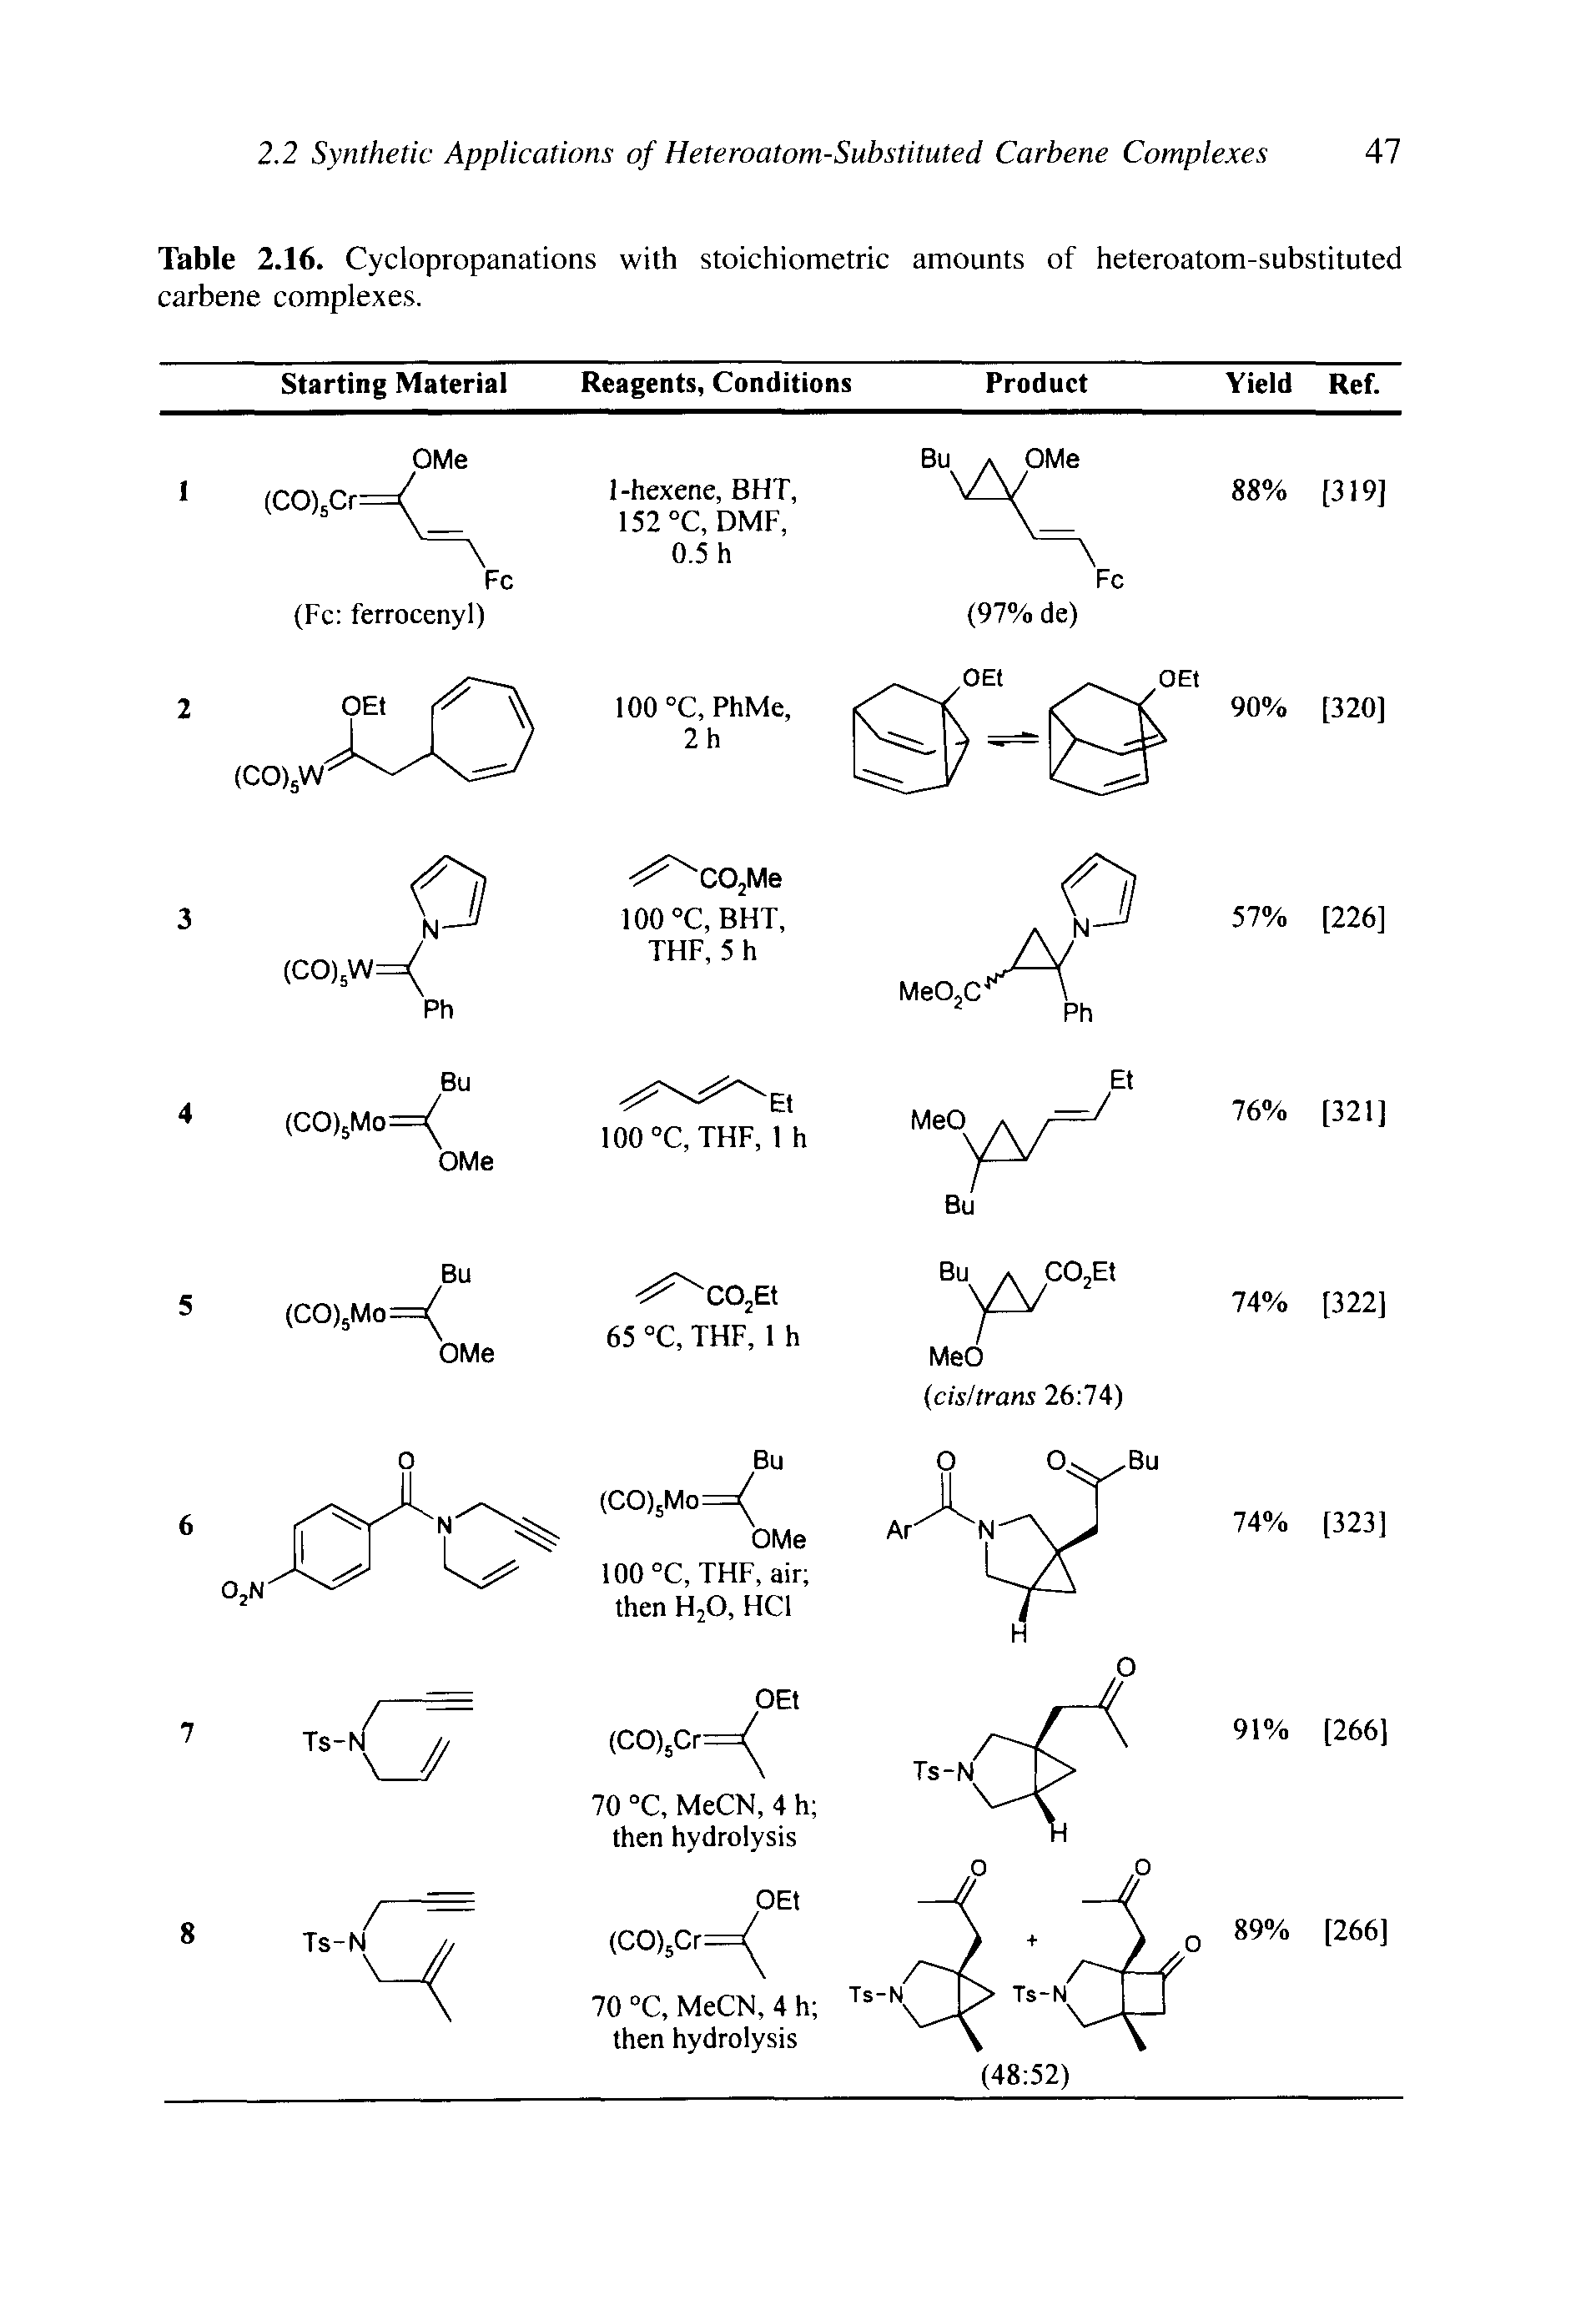 Table 2.16. Cyclopropanations with stoichiometric amounts of heteroatom-substituted carbene complexes.